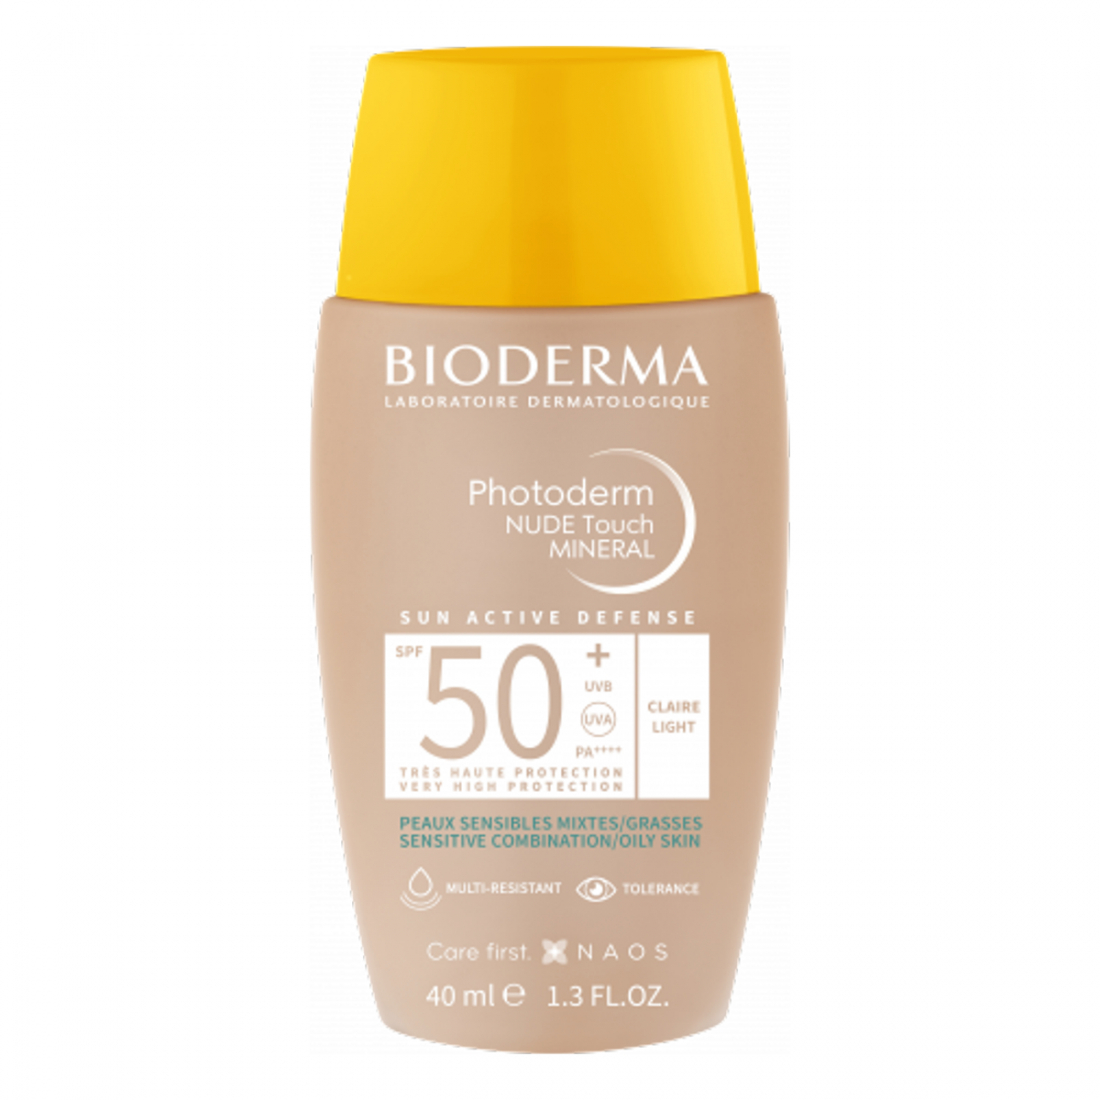 Photoderm Nude Touch Mineral SPF50+ - Claire 40 ml